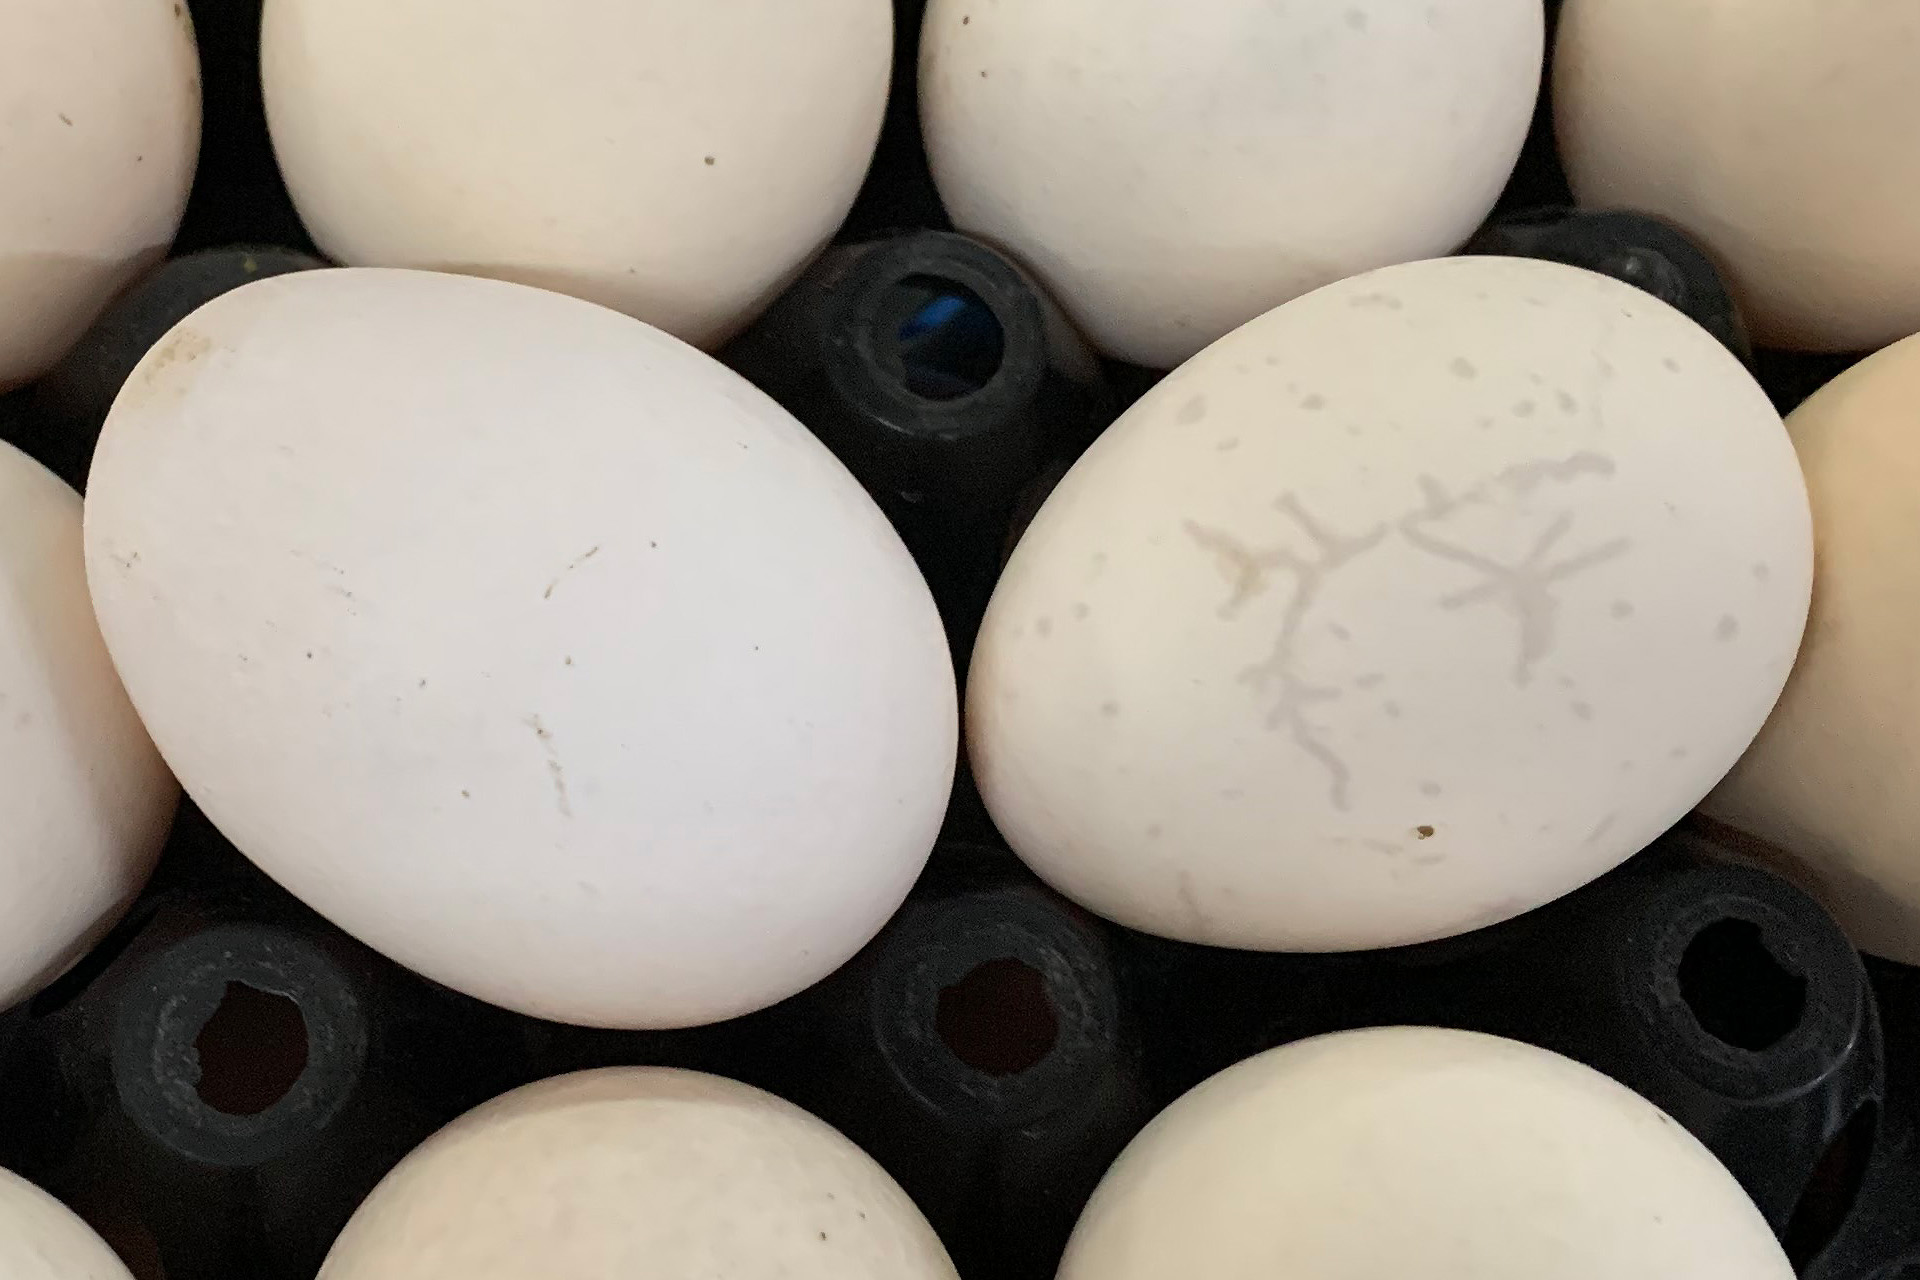 Evaluating the exterior quality of hatching eggs